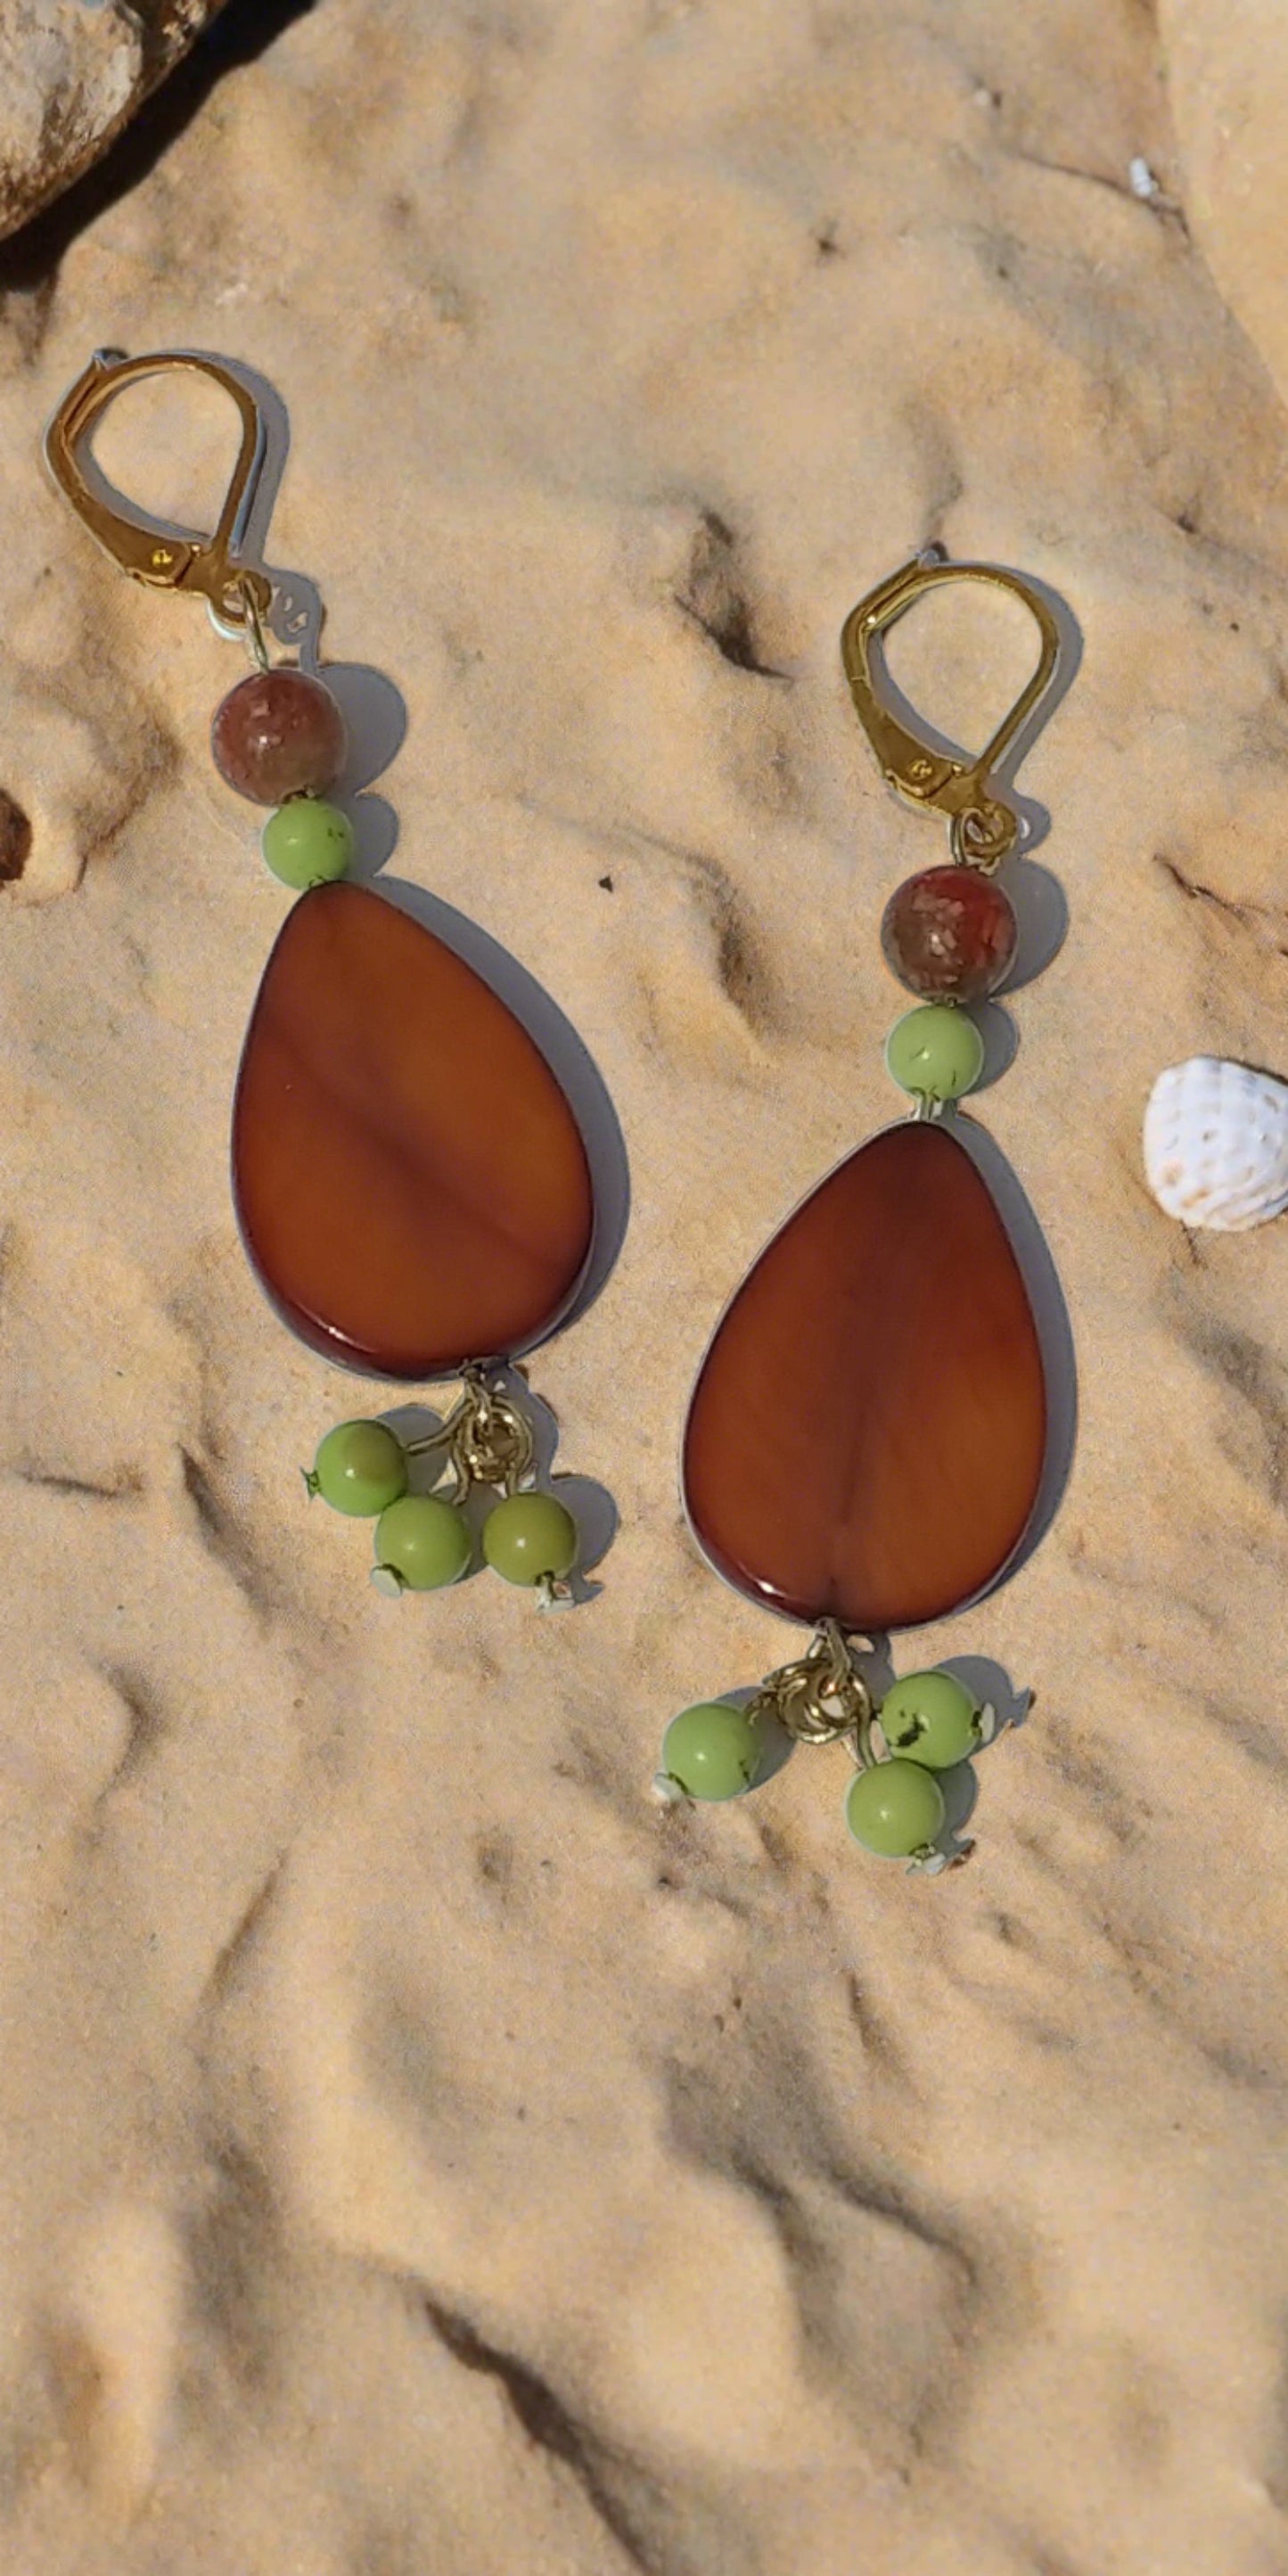 Our brown shell earrings with green accent beads.